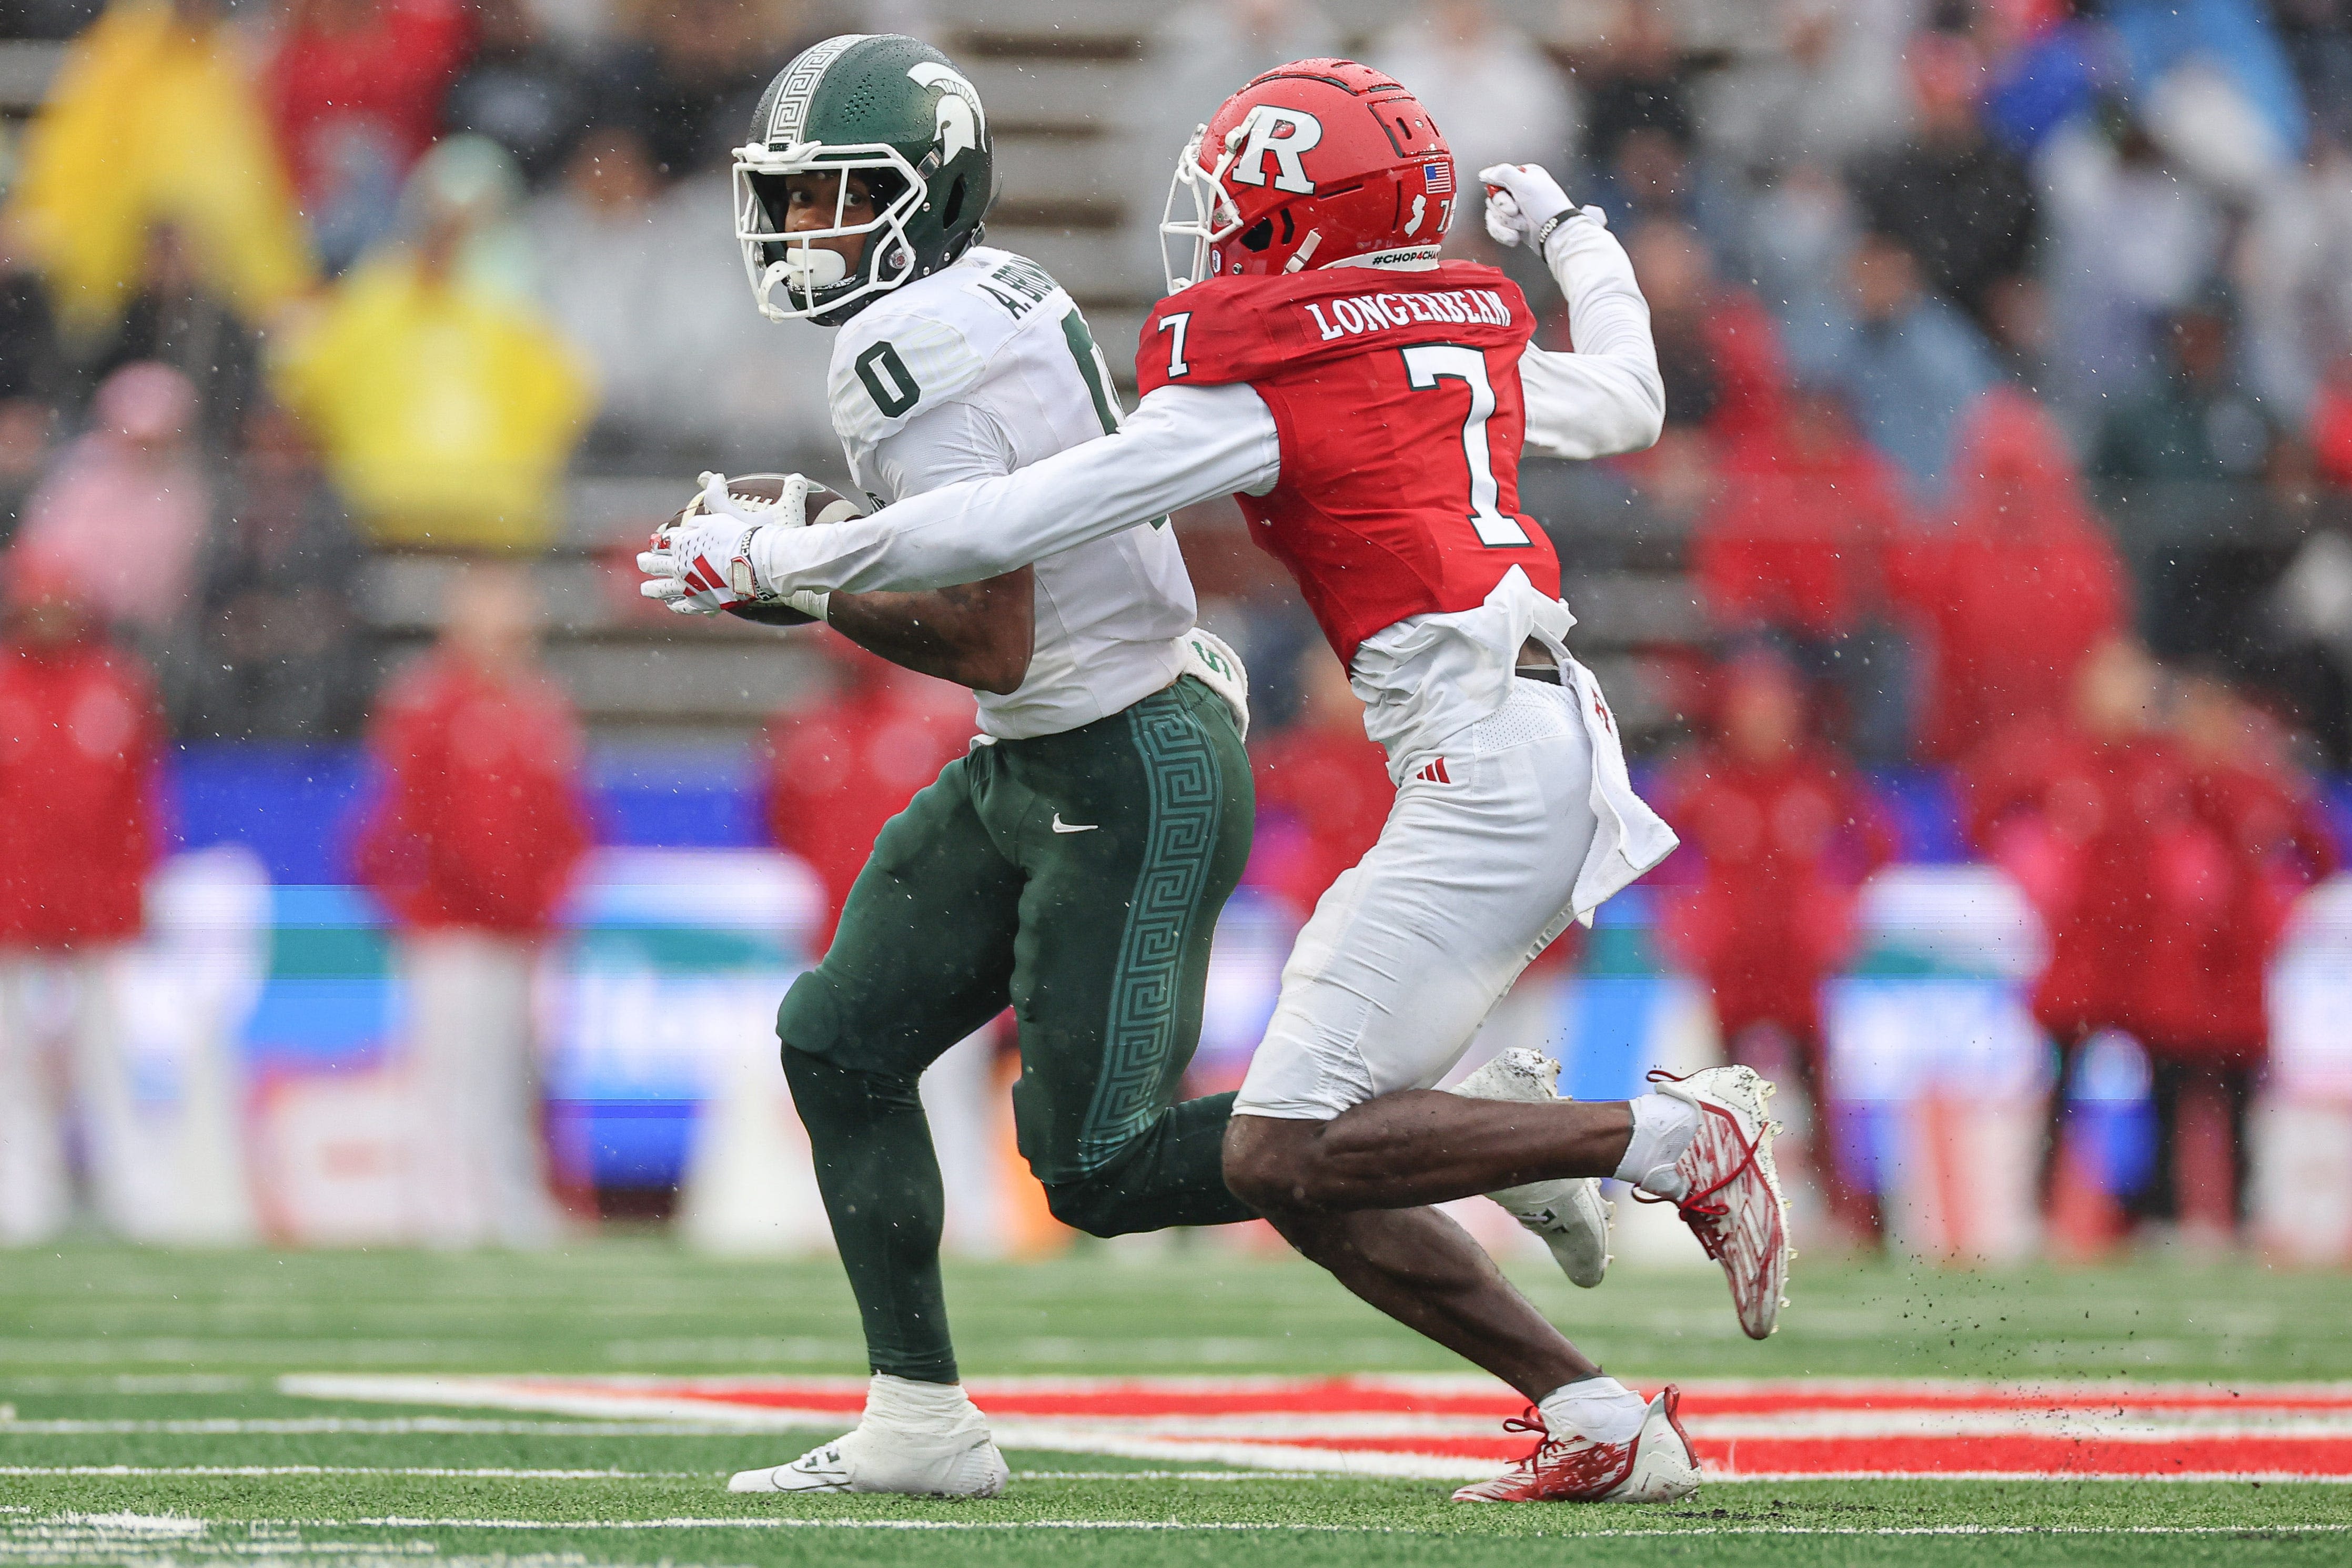 A star Rutgers football player nearly transferred. Here's why he stayed